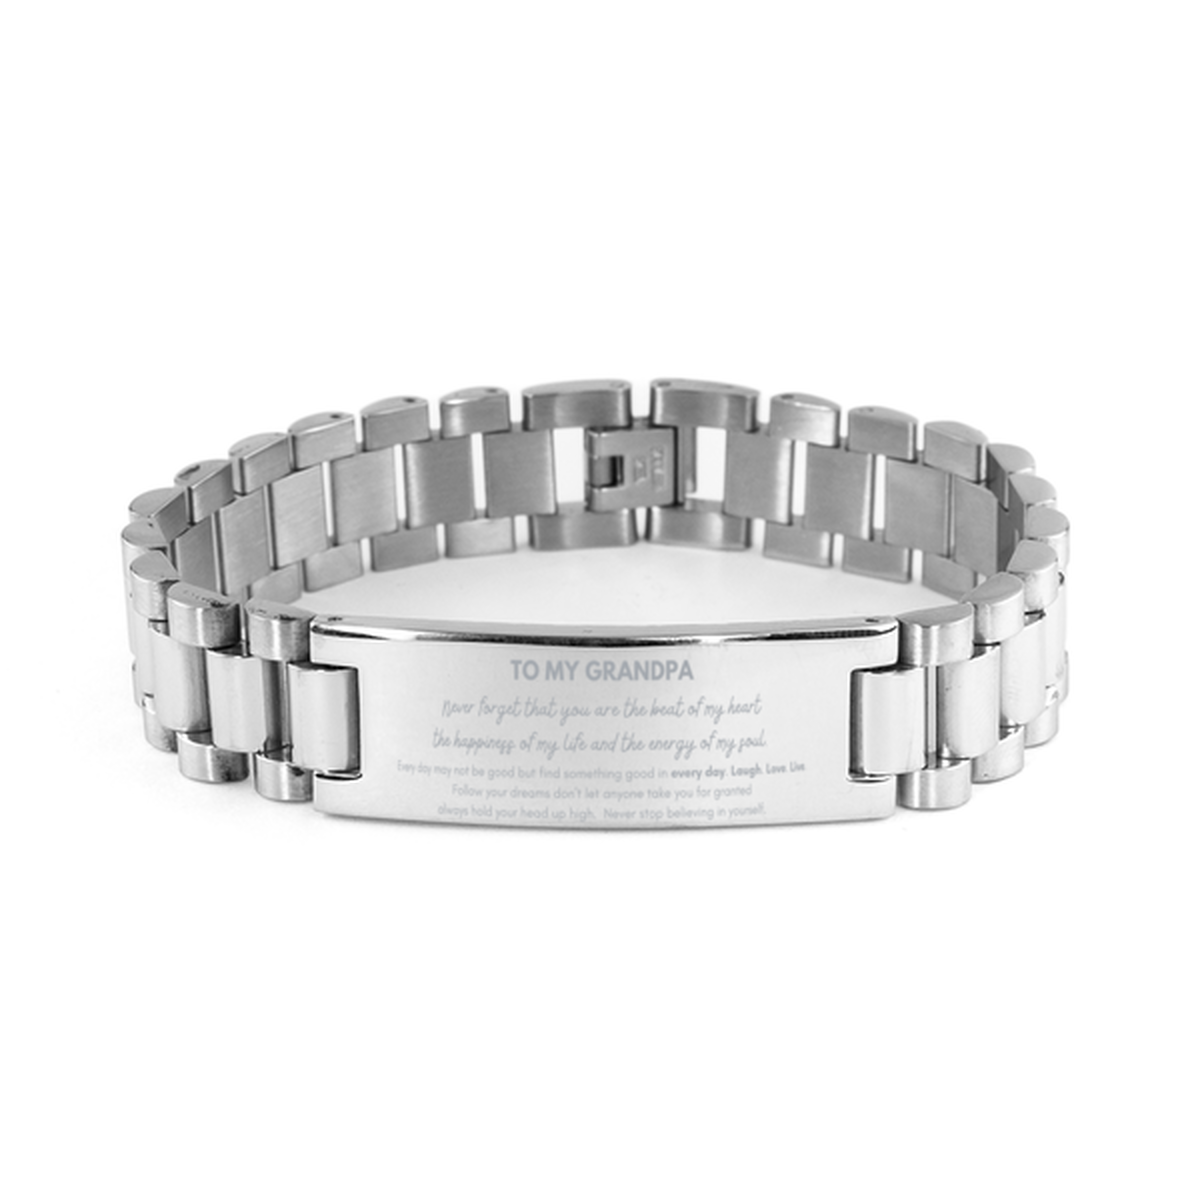 To My Grandpa Bracelet Gifts, Christmas Grandpa Ladder Stainless Steel Bracelet Present, Birthday Unique Motivational For Grandpa, To My Grandpa Never forget that you are the beat of my heart the happiness of my life and the energy of my soul